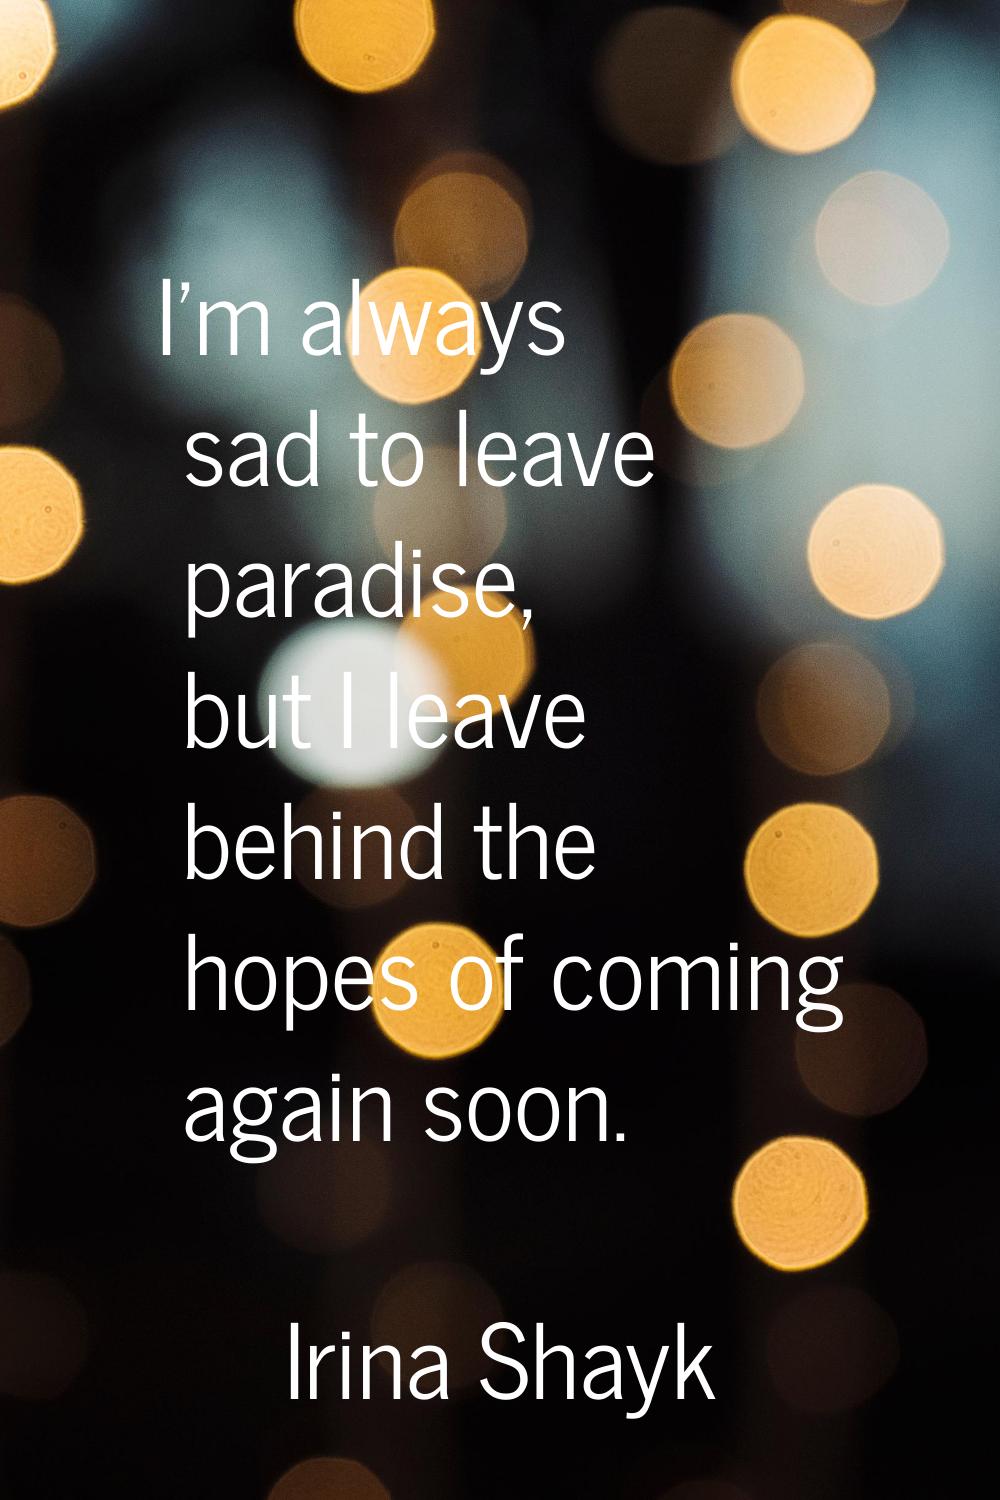 I'm always sad to leave paradise, but I leave behind the hopes of coming again soon.